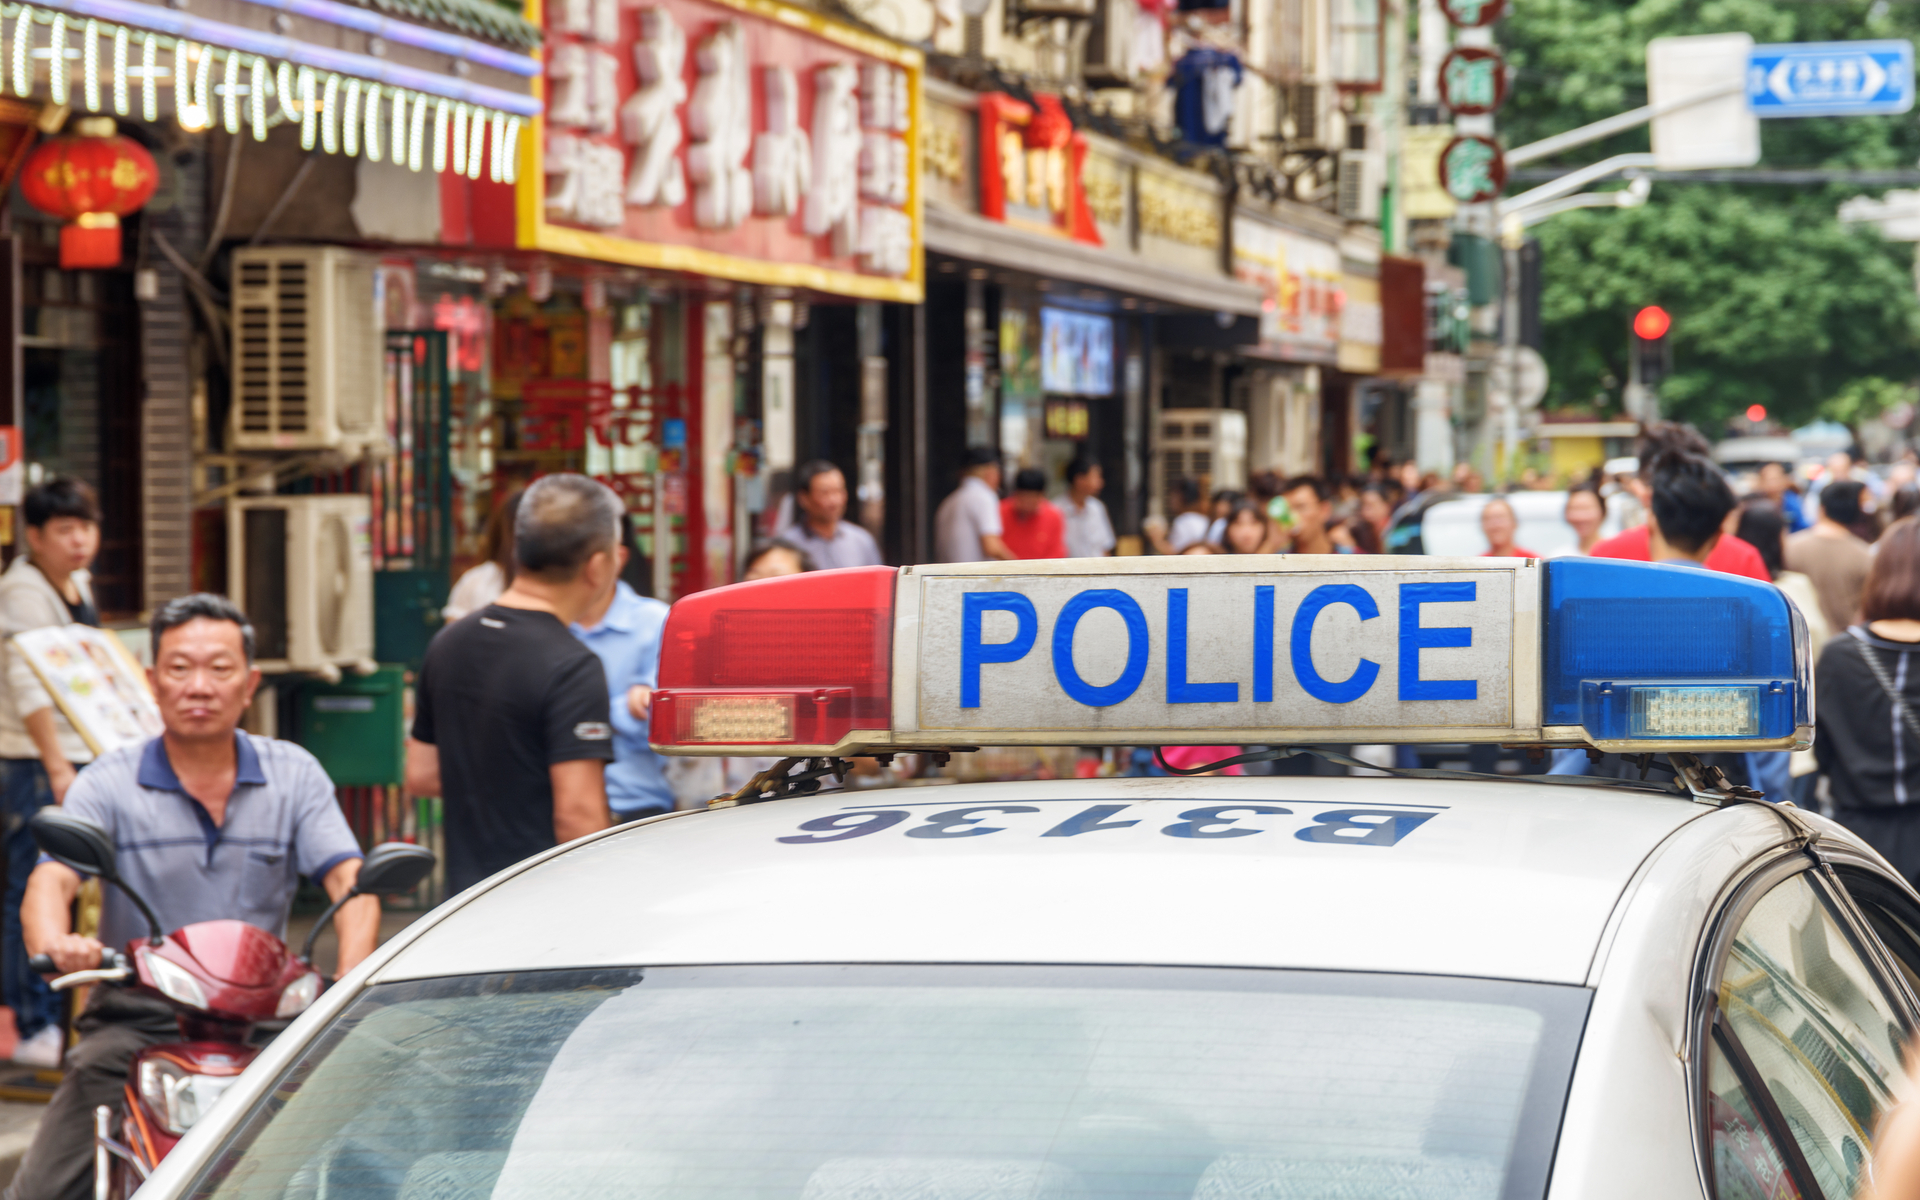 crypto project in China raided